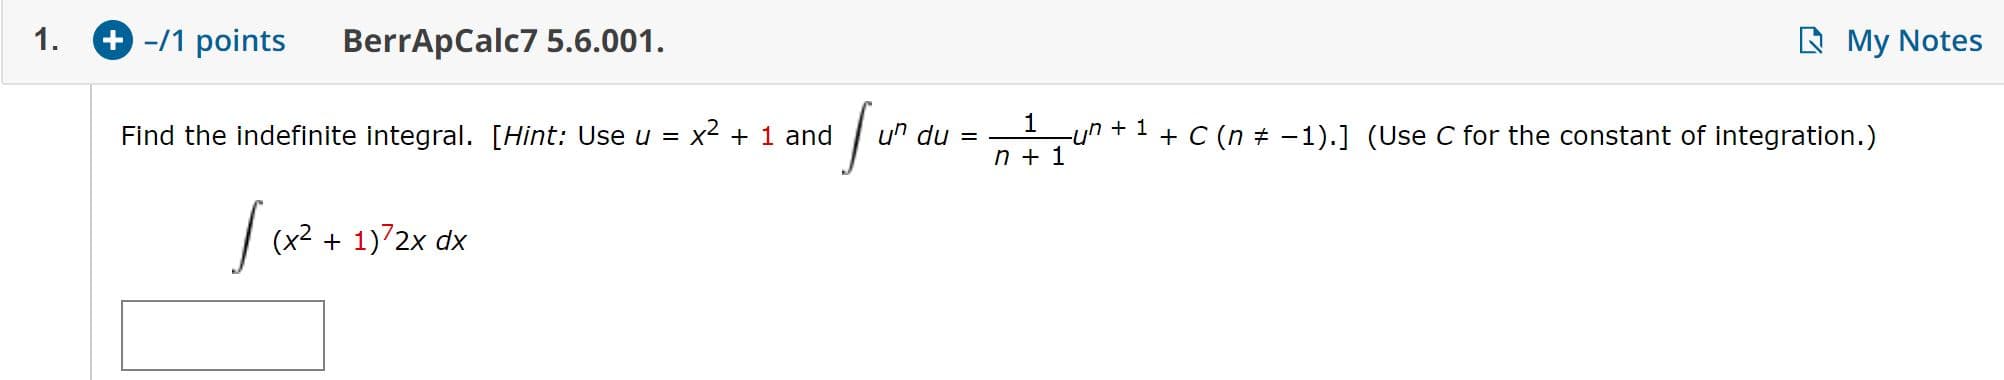 +-/1 points
My Notes
1
BerrApCalc7 5.6.001
1
un du =
-un 1C (n
n+1
-1).] (Use C for the constant of integration.)
x2 1 and
Find the indefinite integral. [Hint: Use u
(x2 1)72x dx
